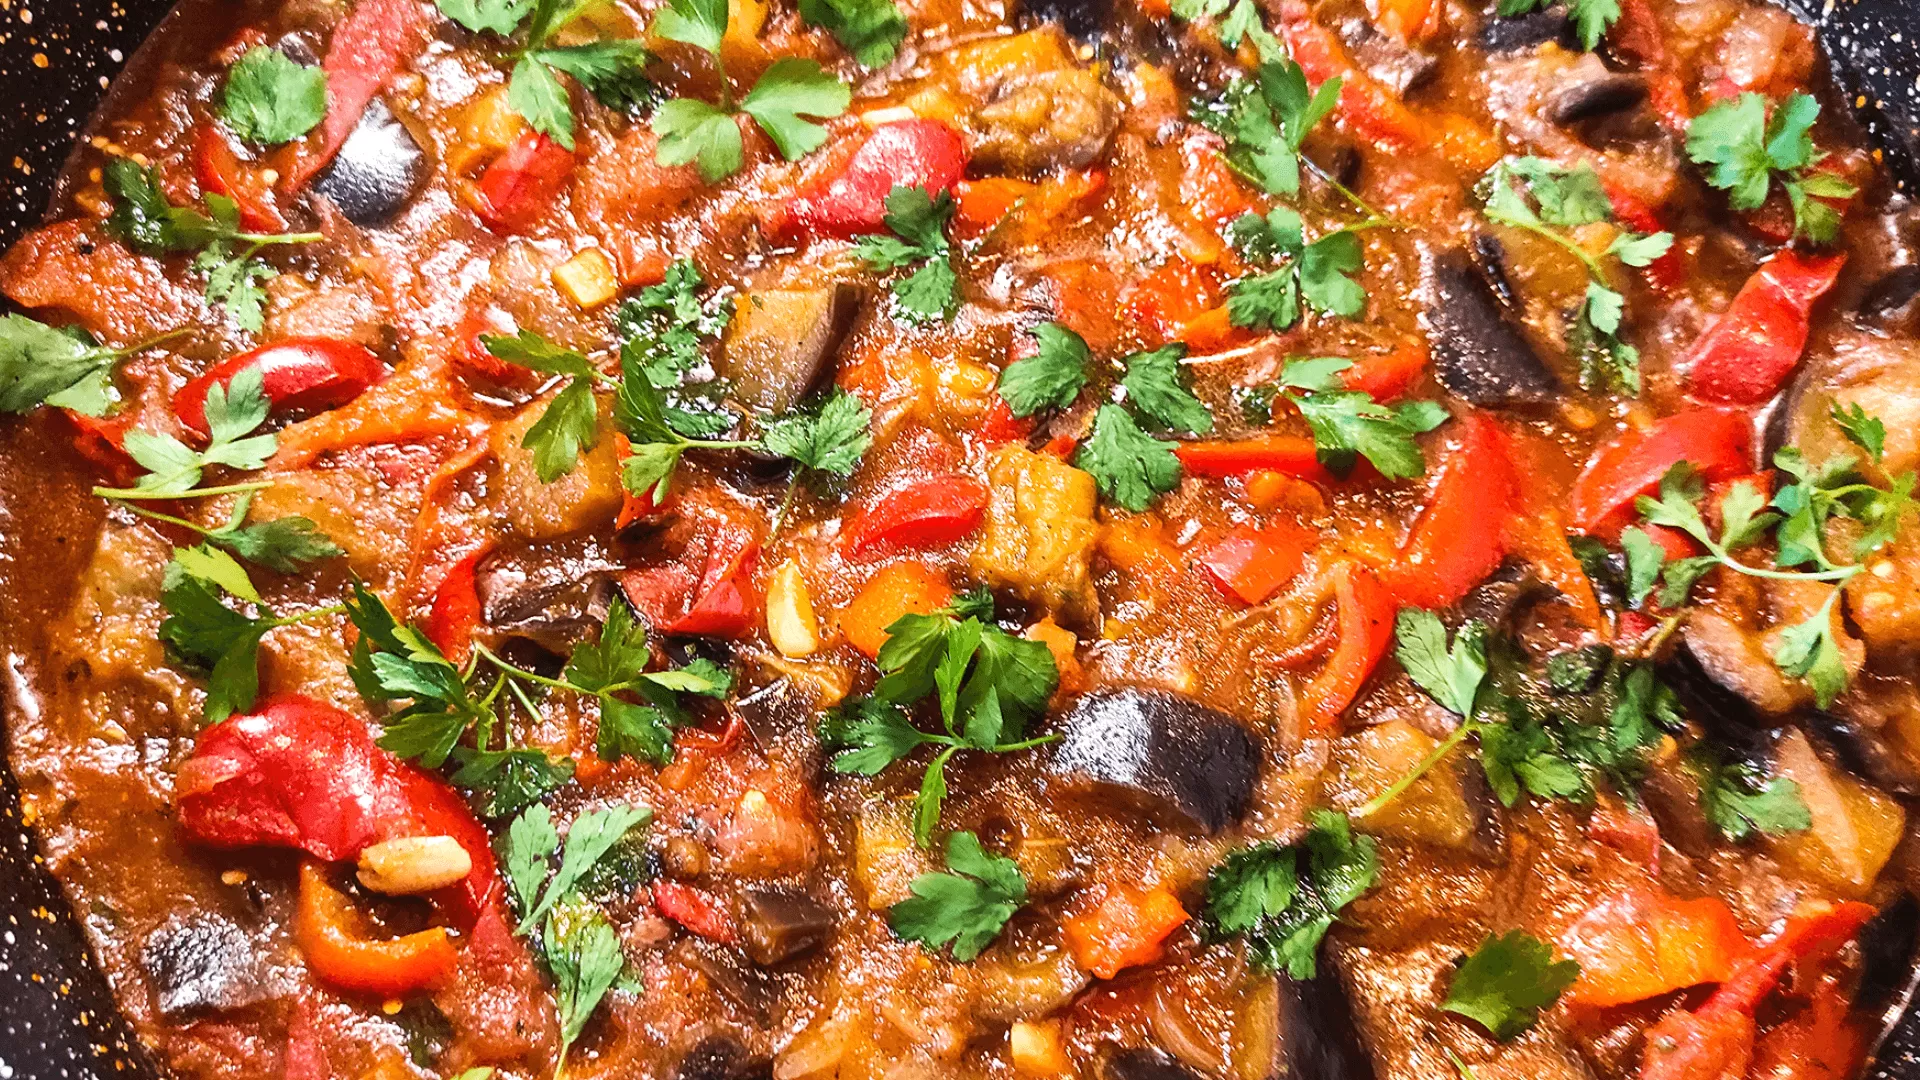 Healthy Vegetable Casserole with Eggplants